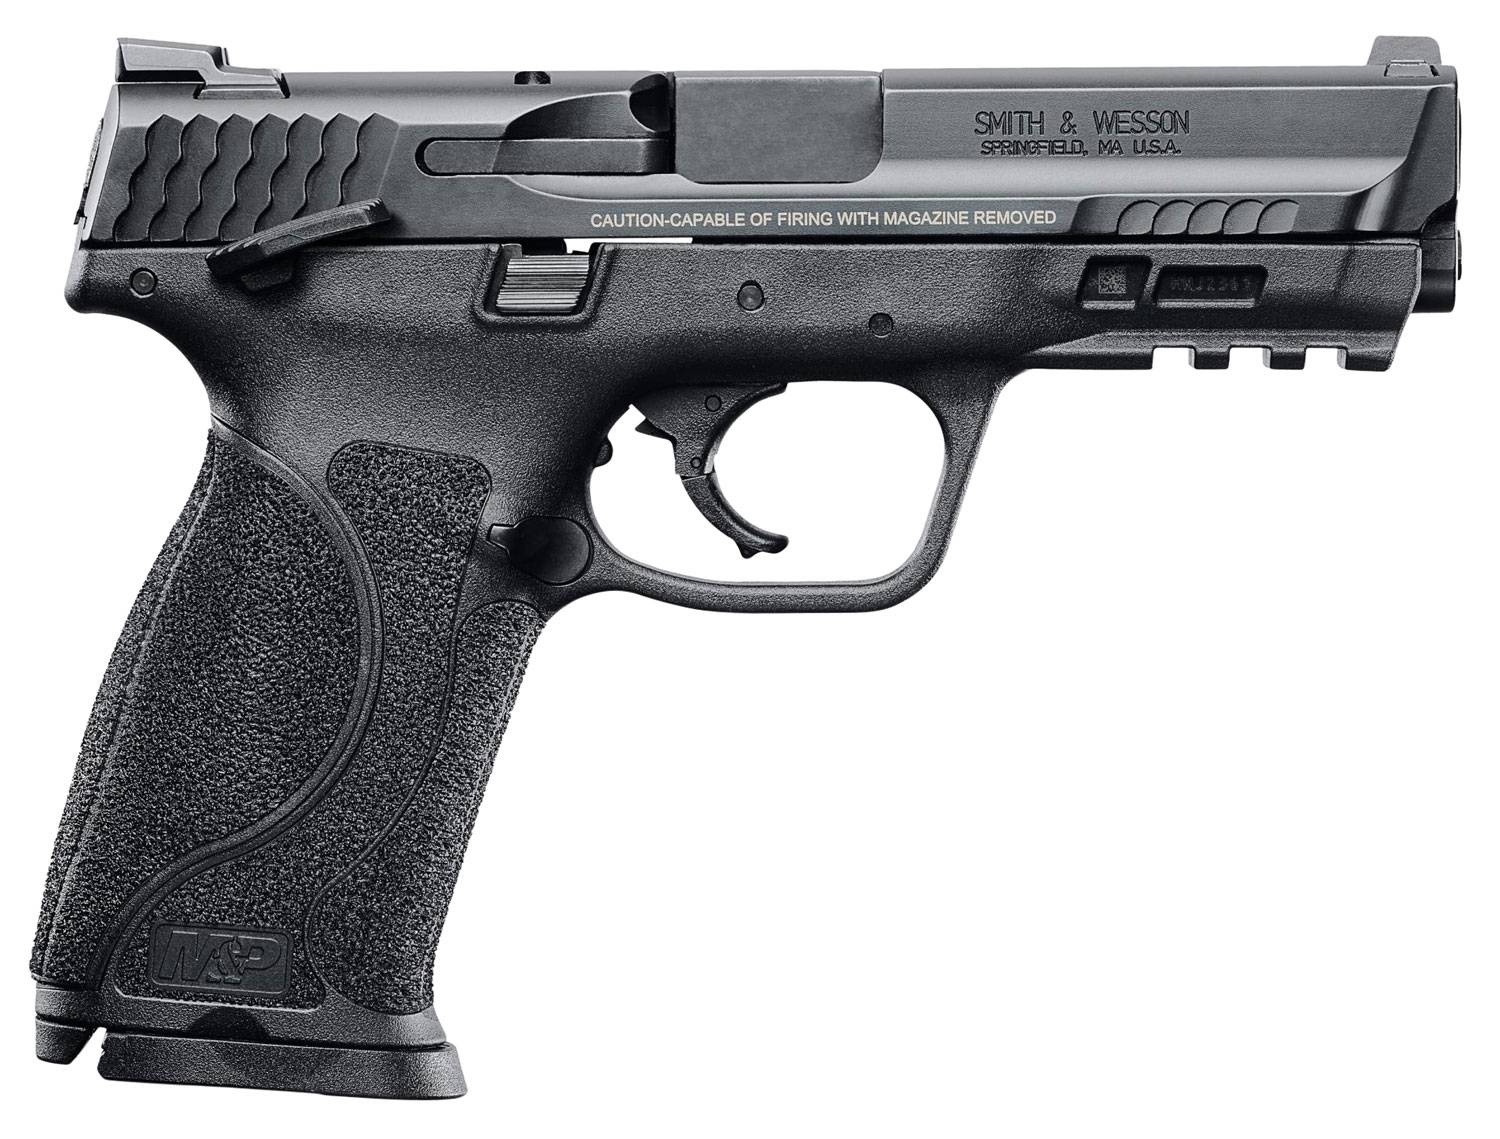 Smith & Wesson 11524 M&P M2.0 9mm Luger 4.25" 17+1 Black Stainless Steel Black Interchangeable Backstrap Grip